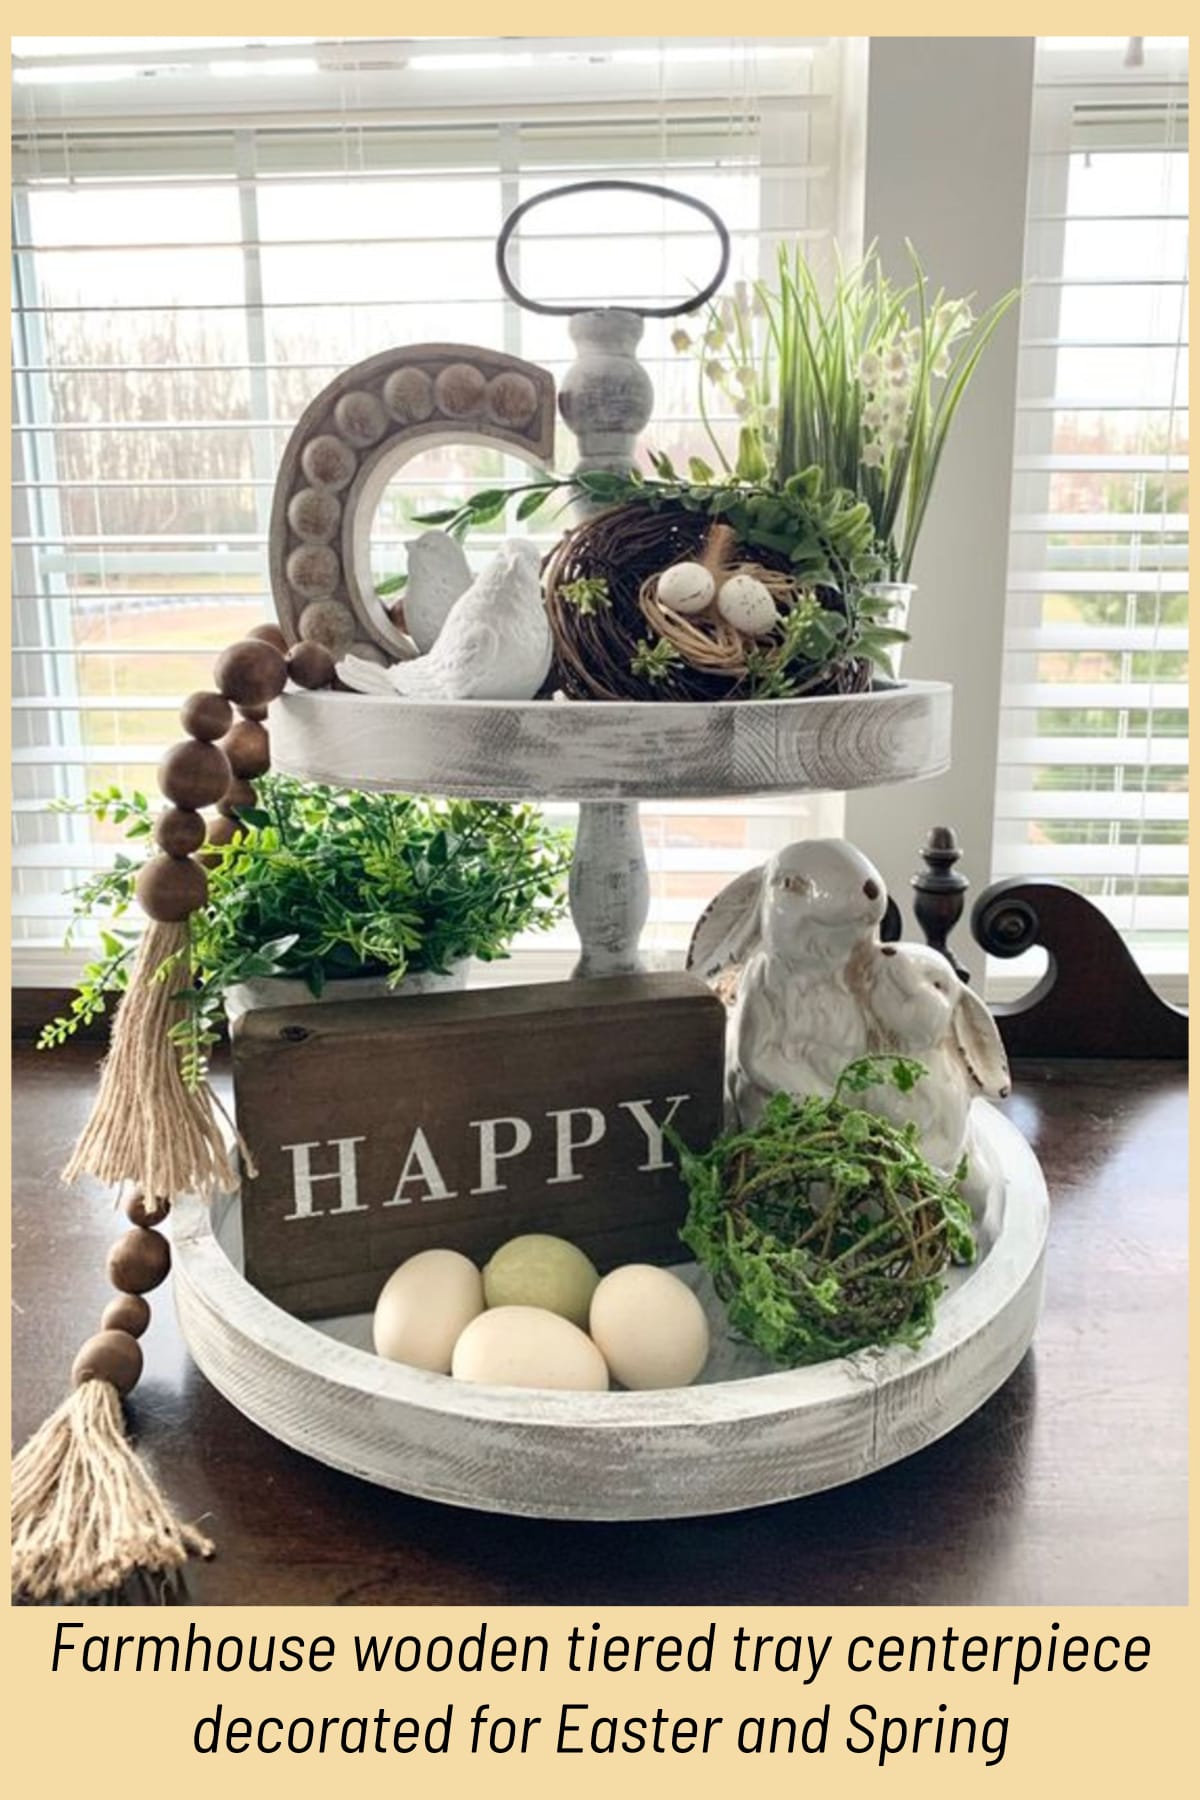 Farmhouse wooden tiered tray centerpiece decorated for Easter and Spring